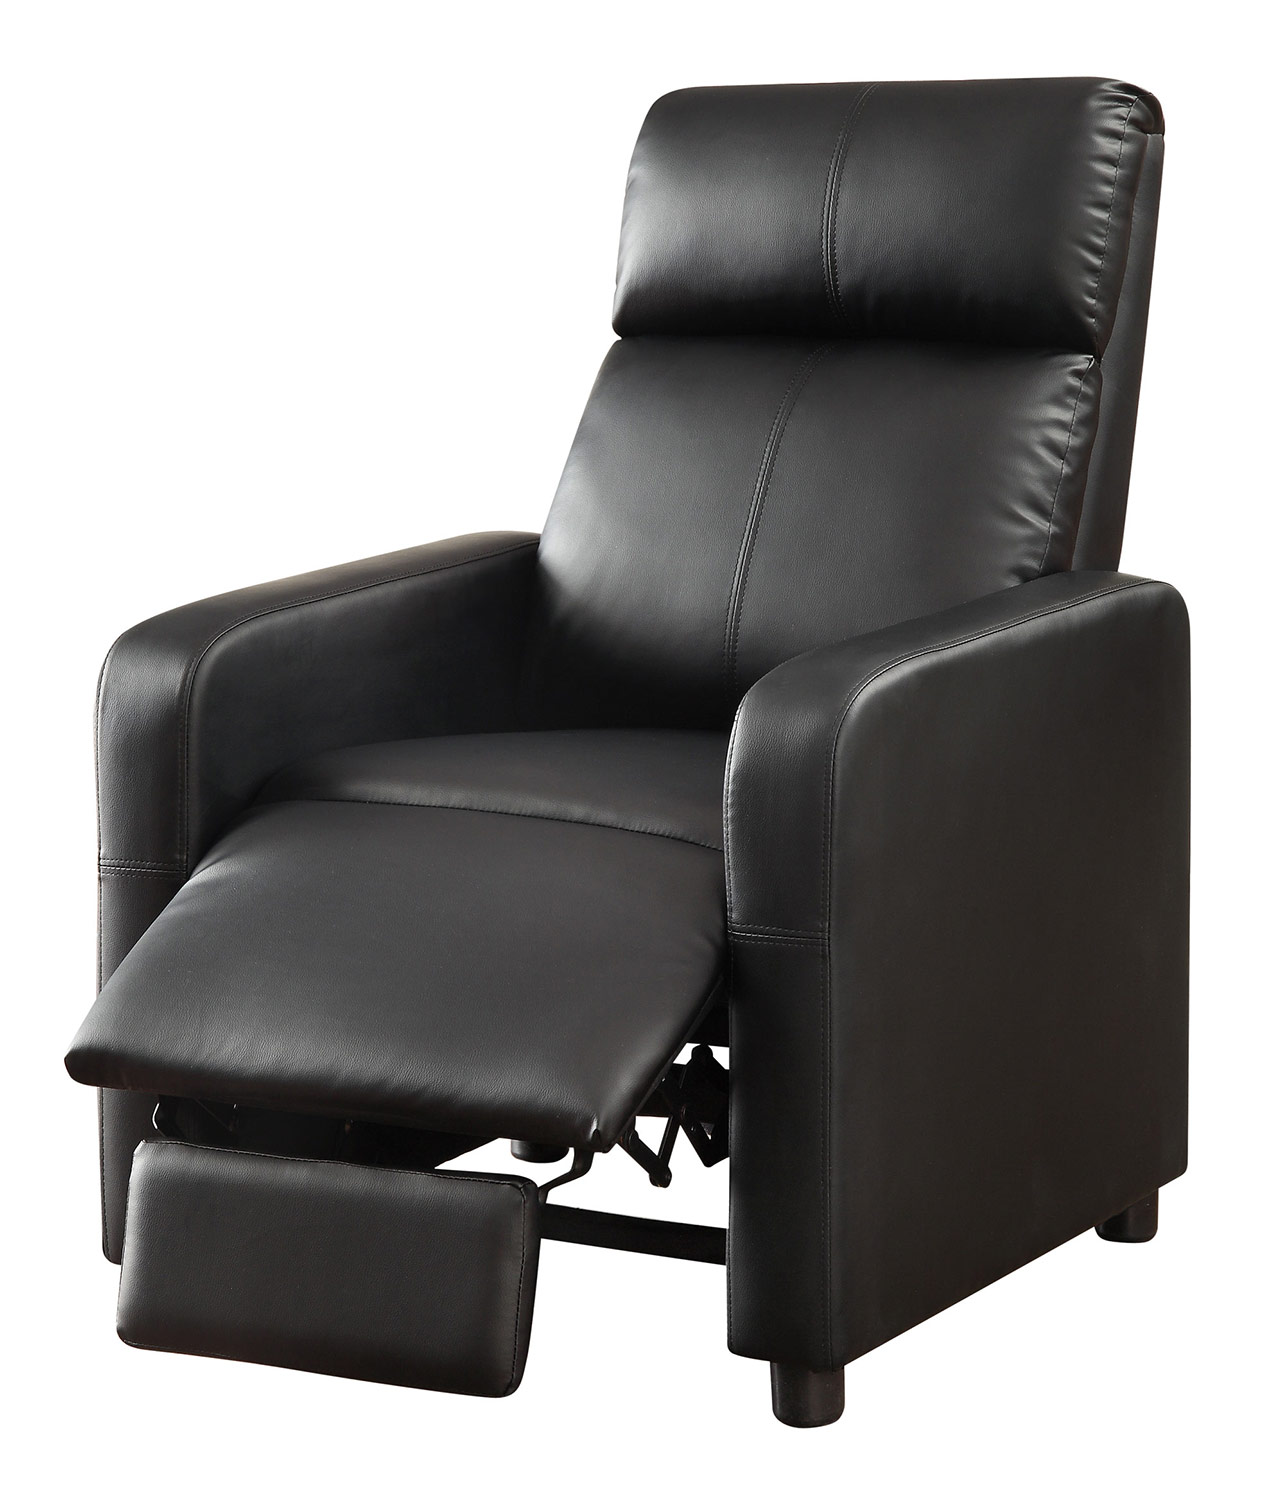 Coaster Toohey Home Theater Push-Back Recliner - Black